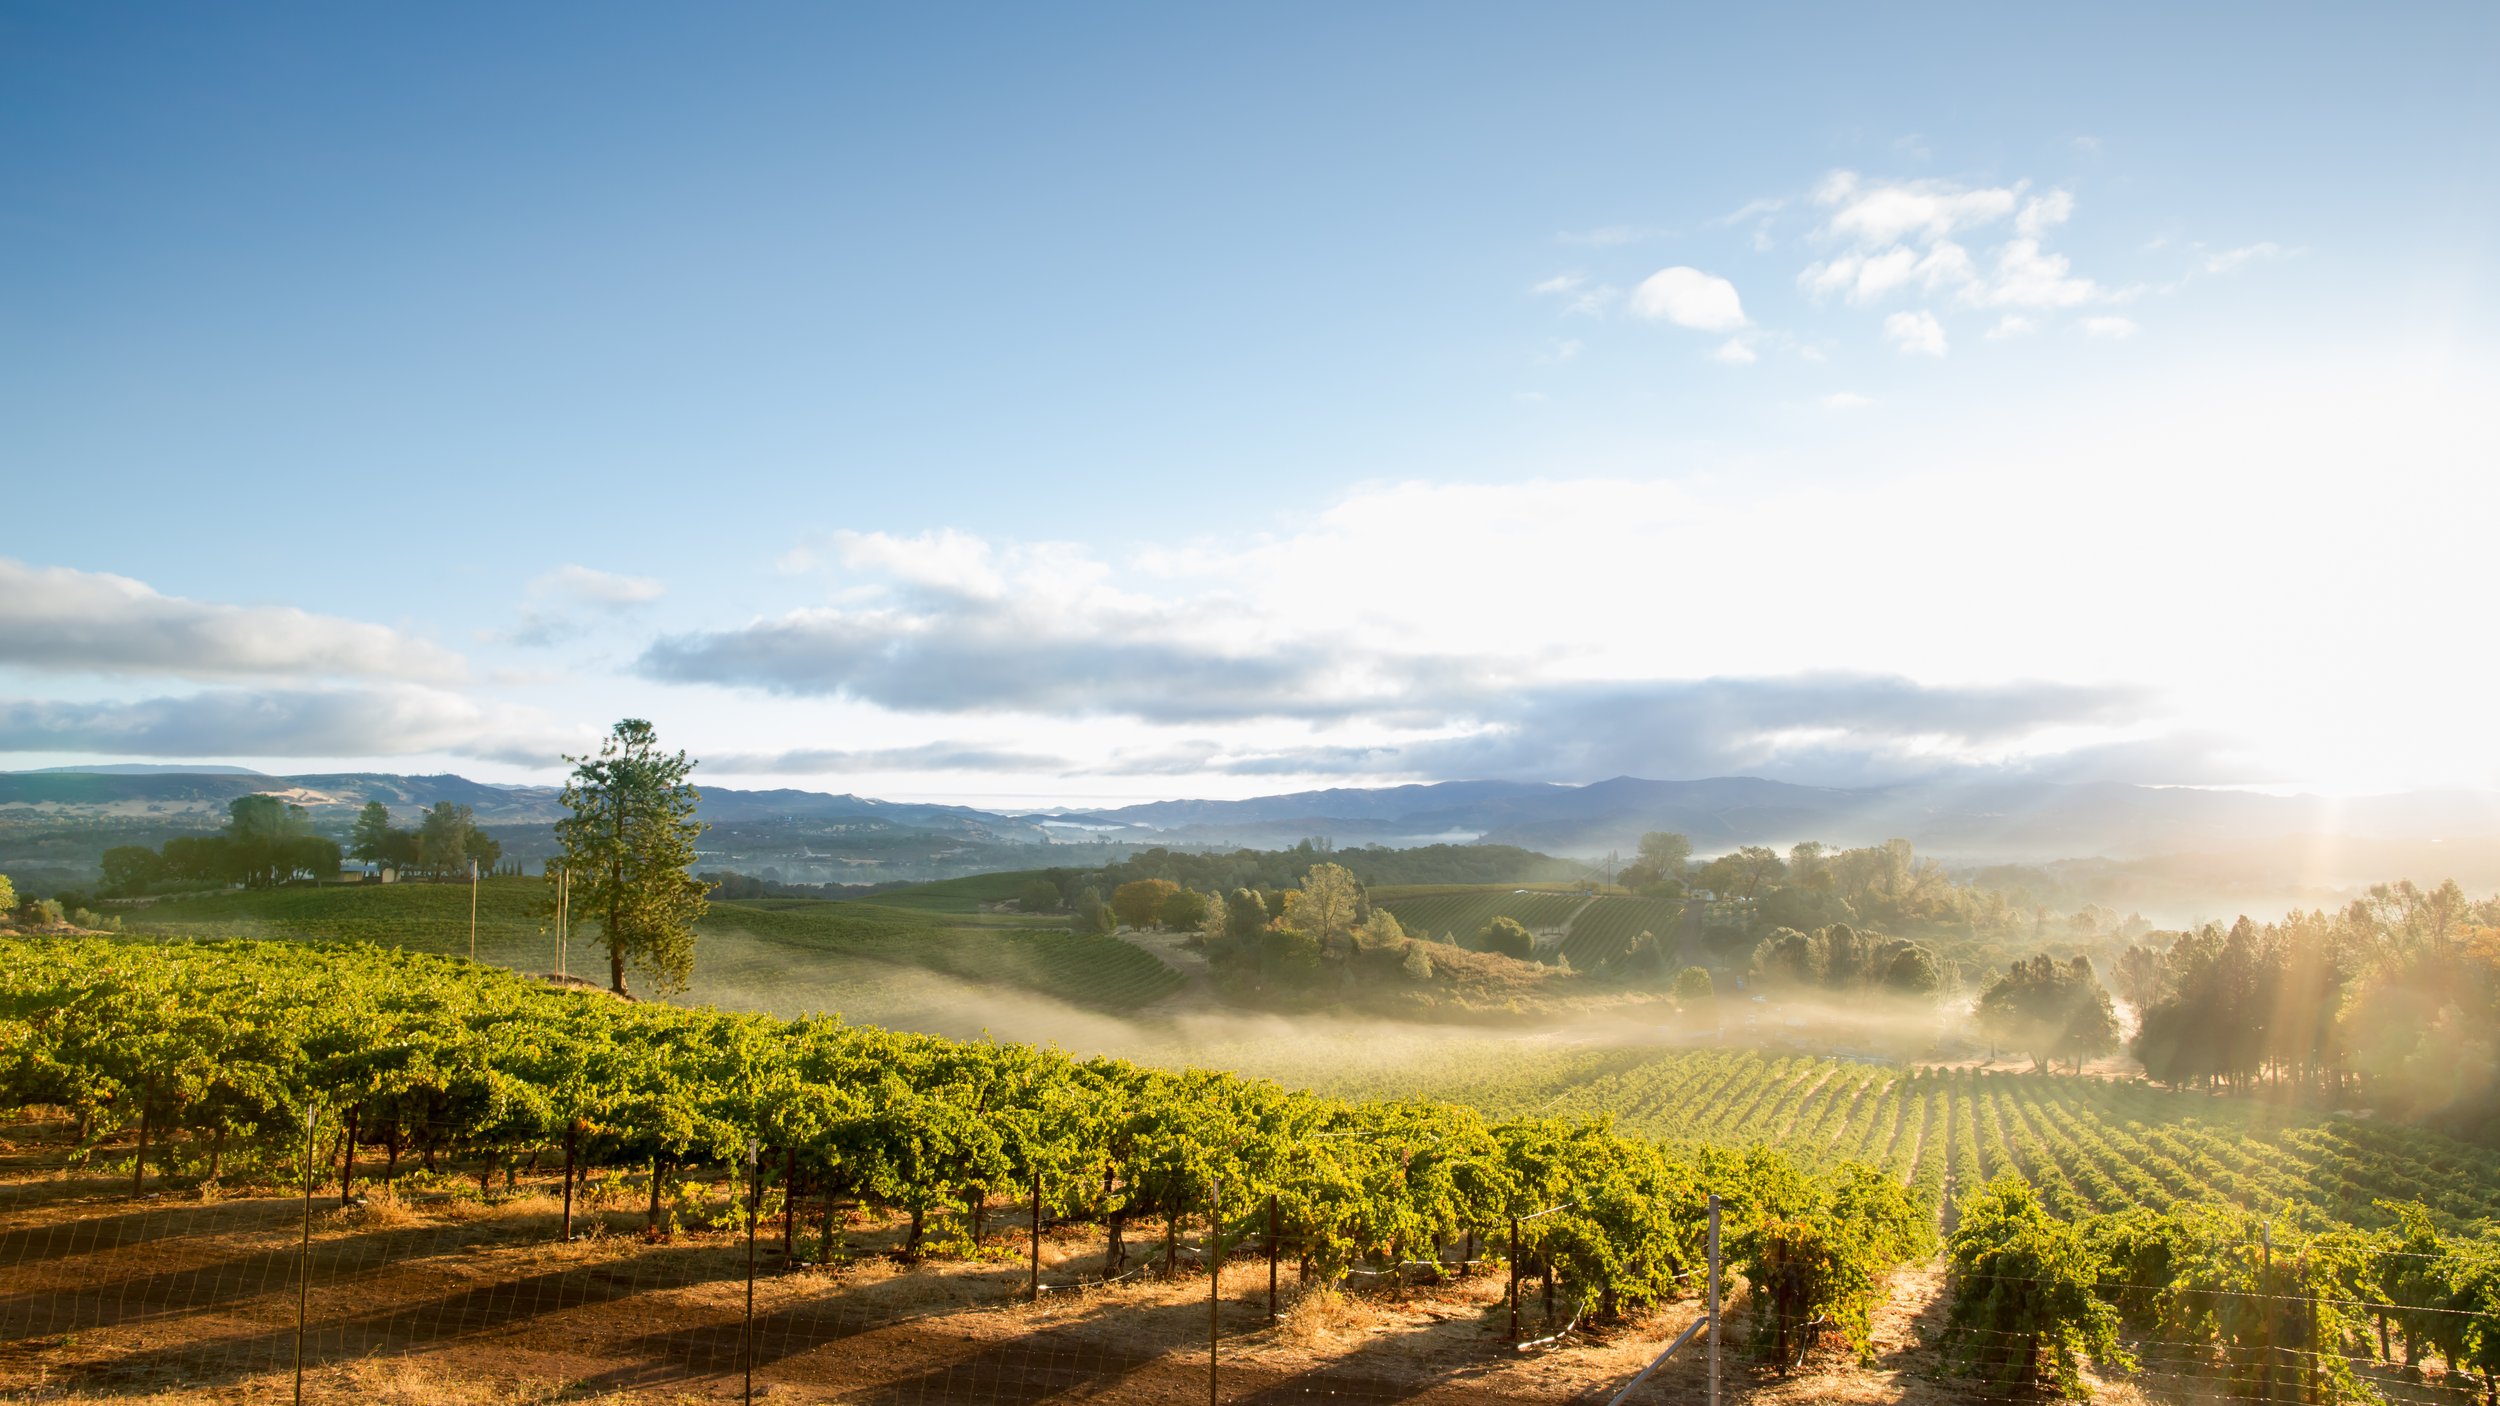 Uncover the Hidden Gem: Discover the Affordable 'Disneyland of Wineries' in the Heart of America's Tuscany, Just a Short Drive from LA!